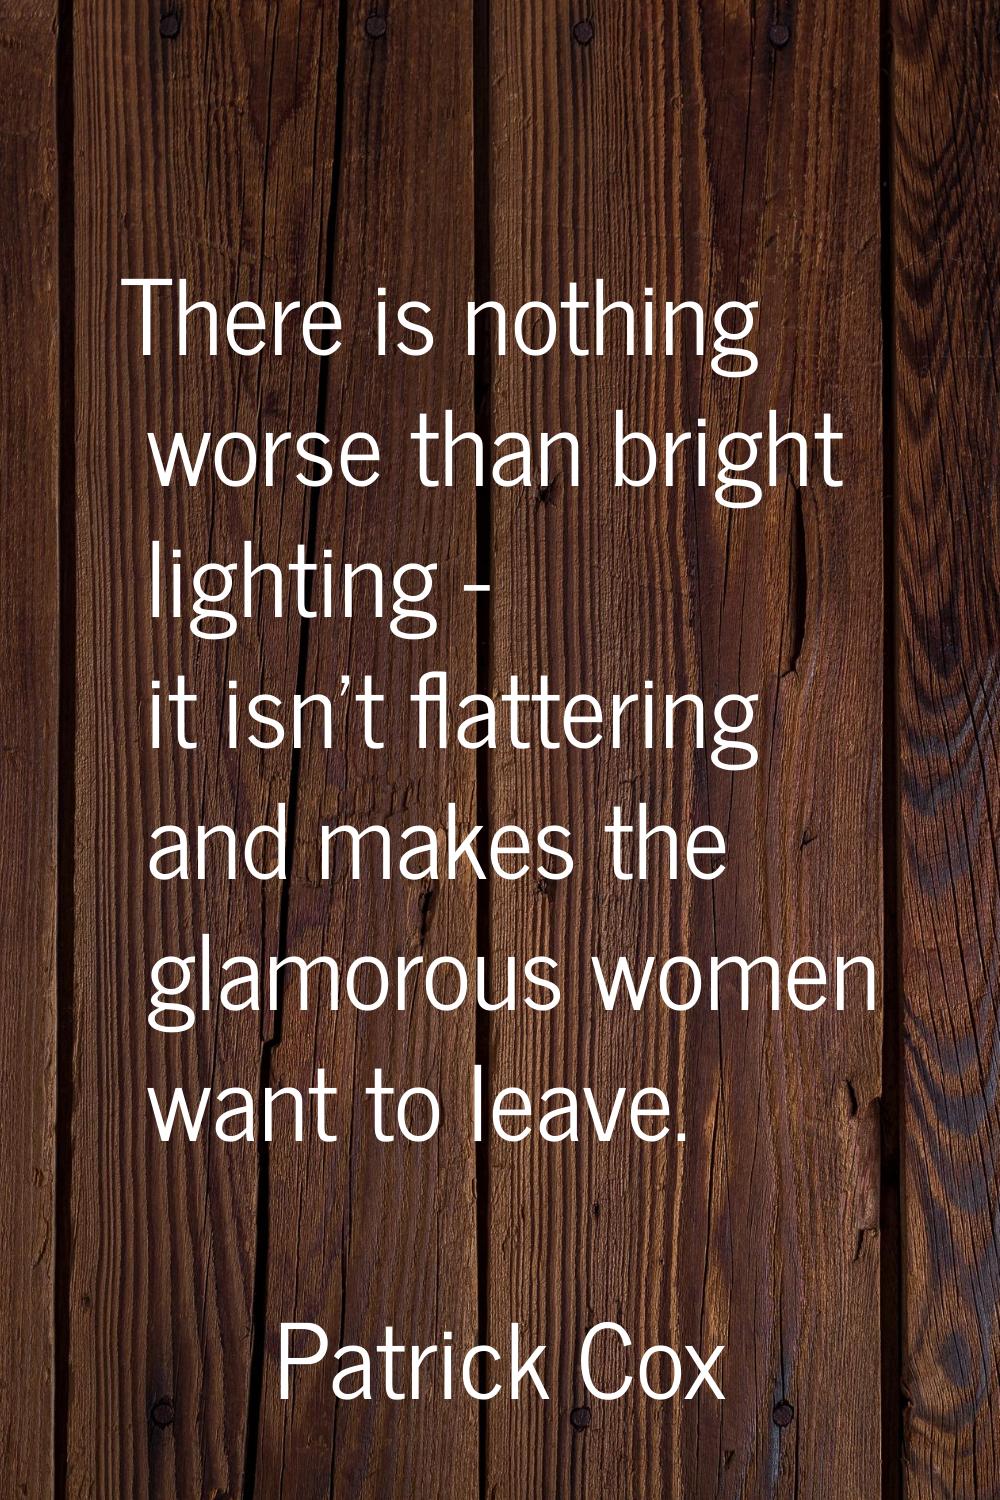 There is nothing worse than bright lighting - it isn't flattering and makes the glamorous women wan